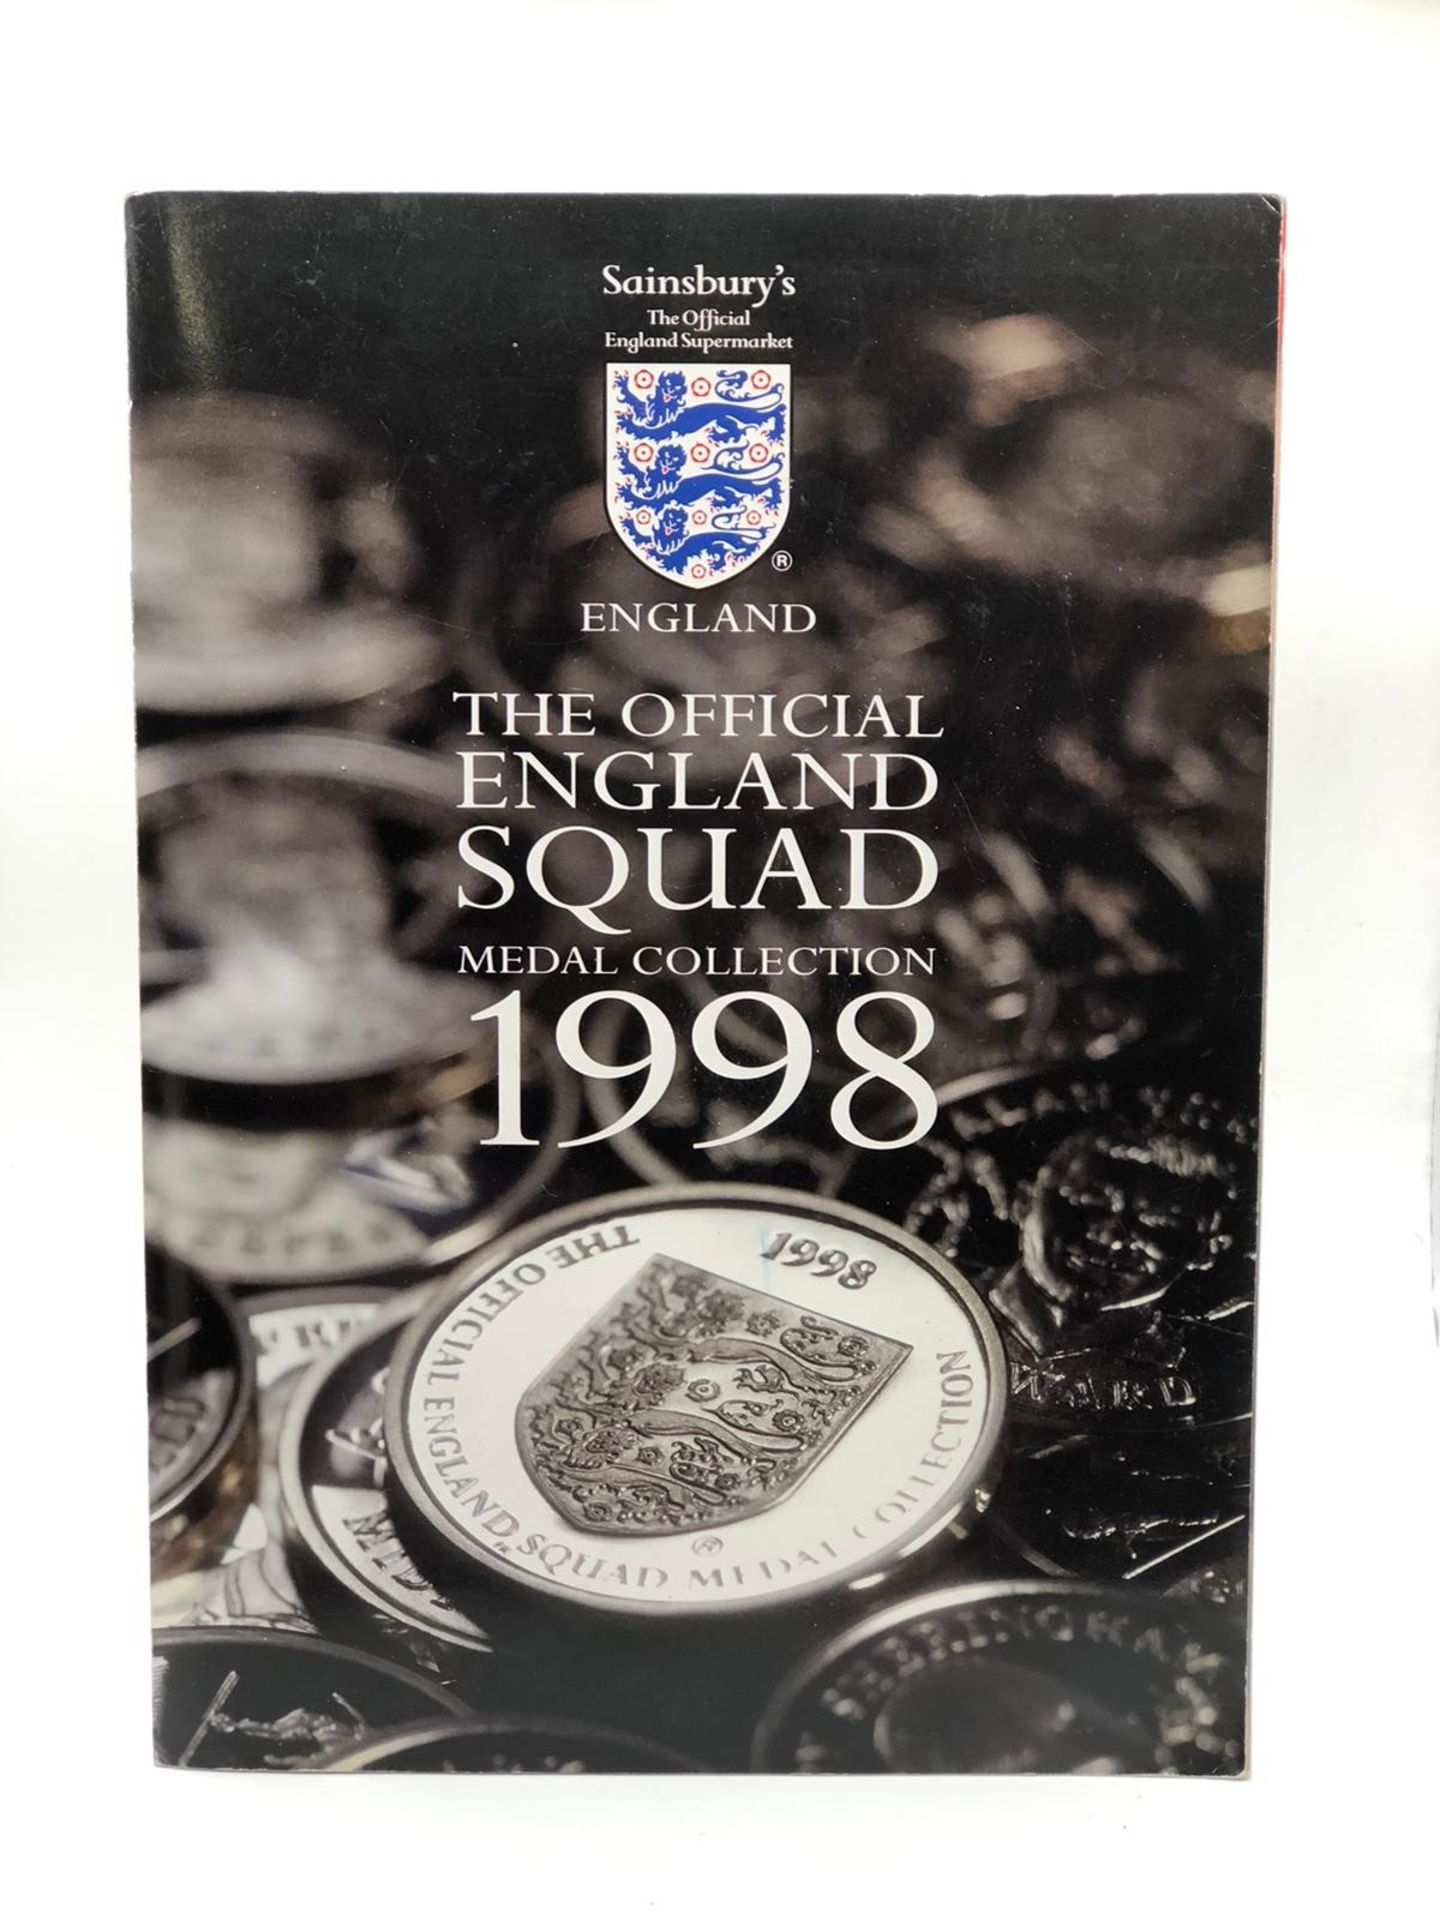 Collectable 1998 Medal Collection The Official England Football Squad - Image 4 of 4